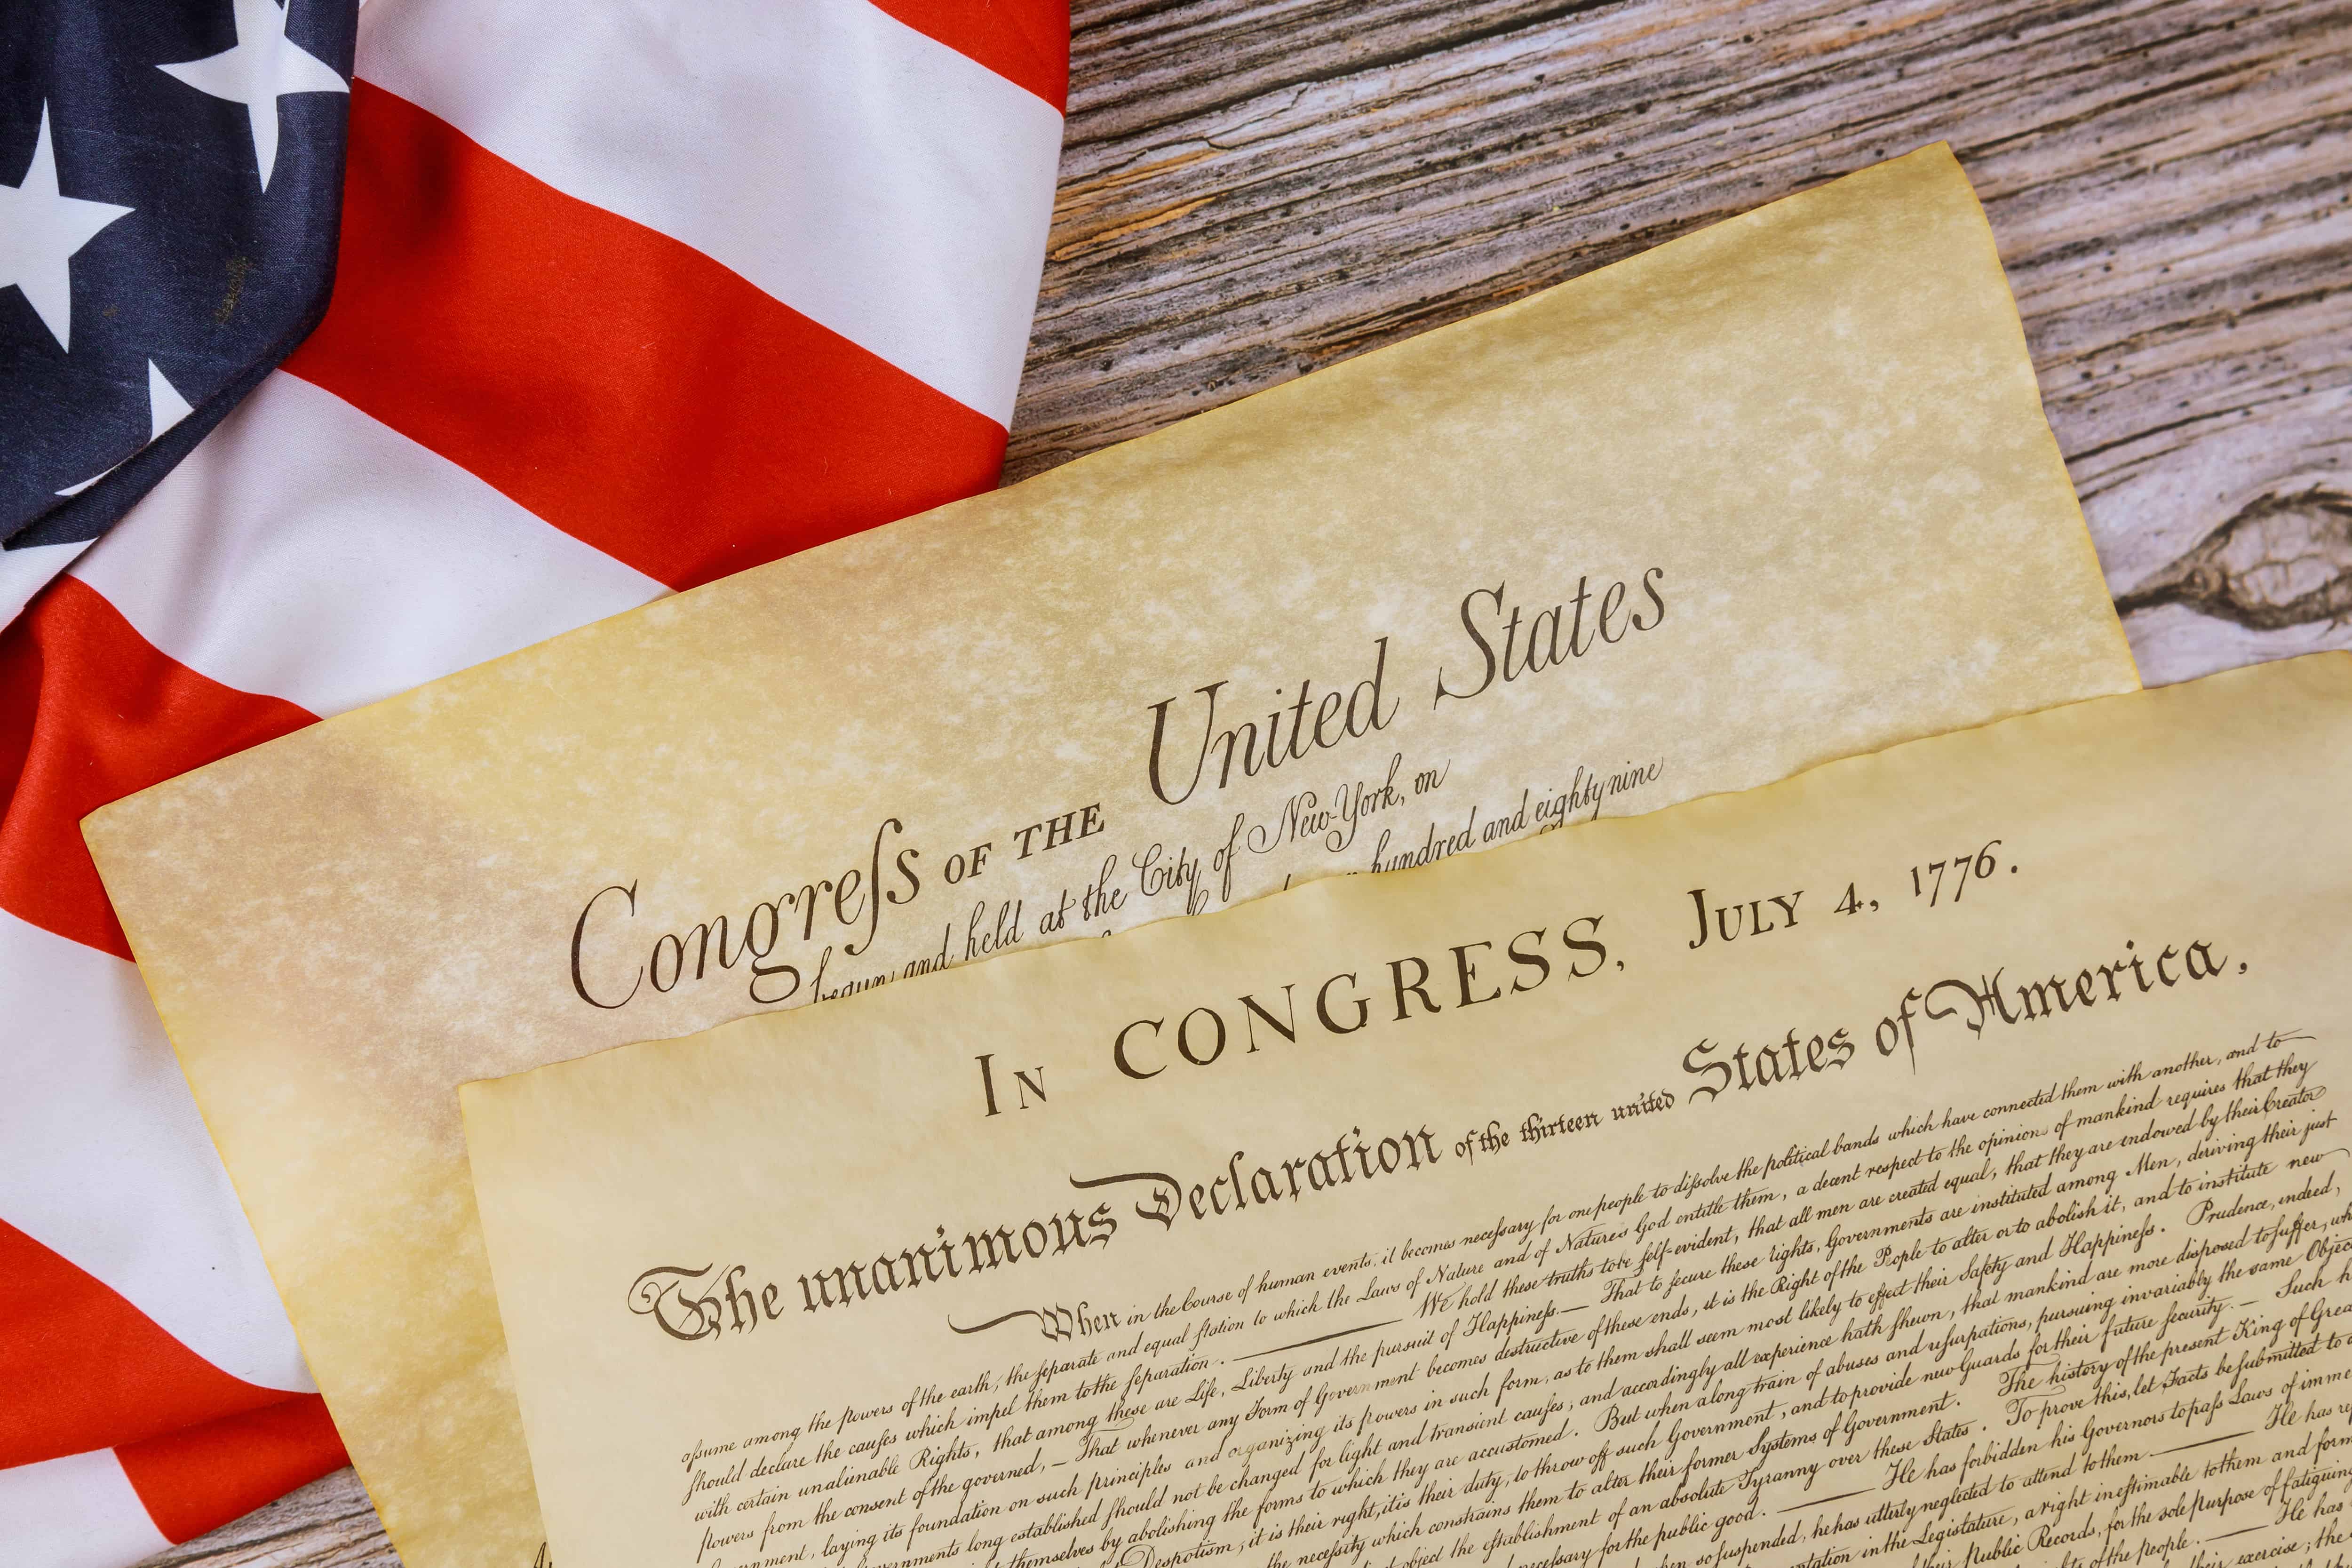 30-essential-bill-of-rights-facts-that-you-can-t-miss